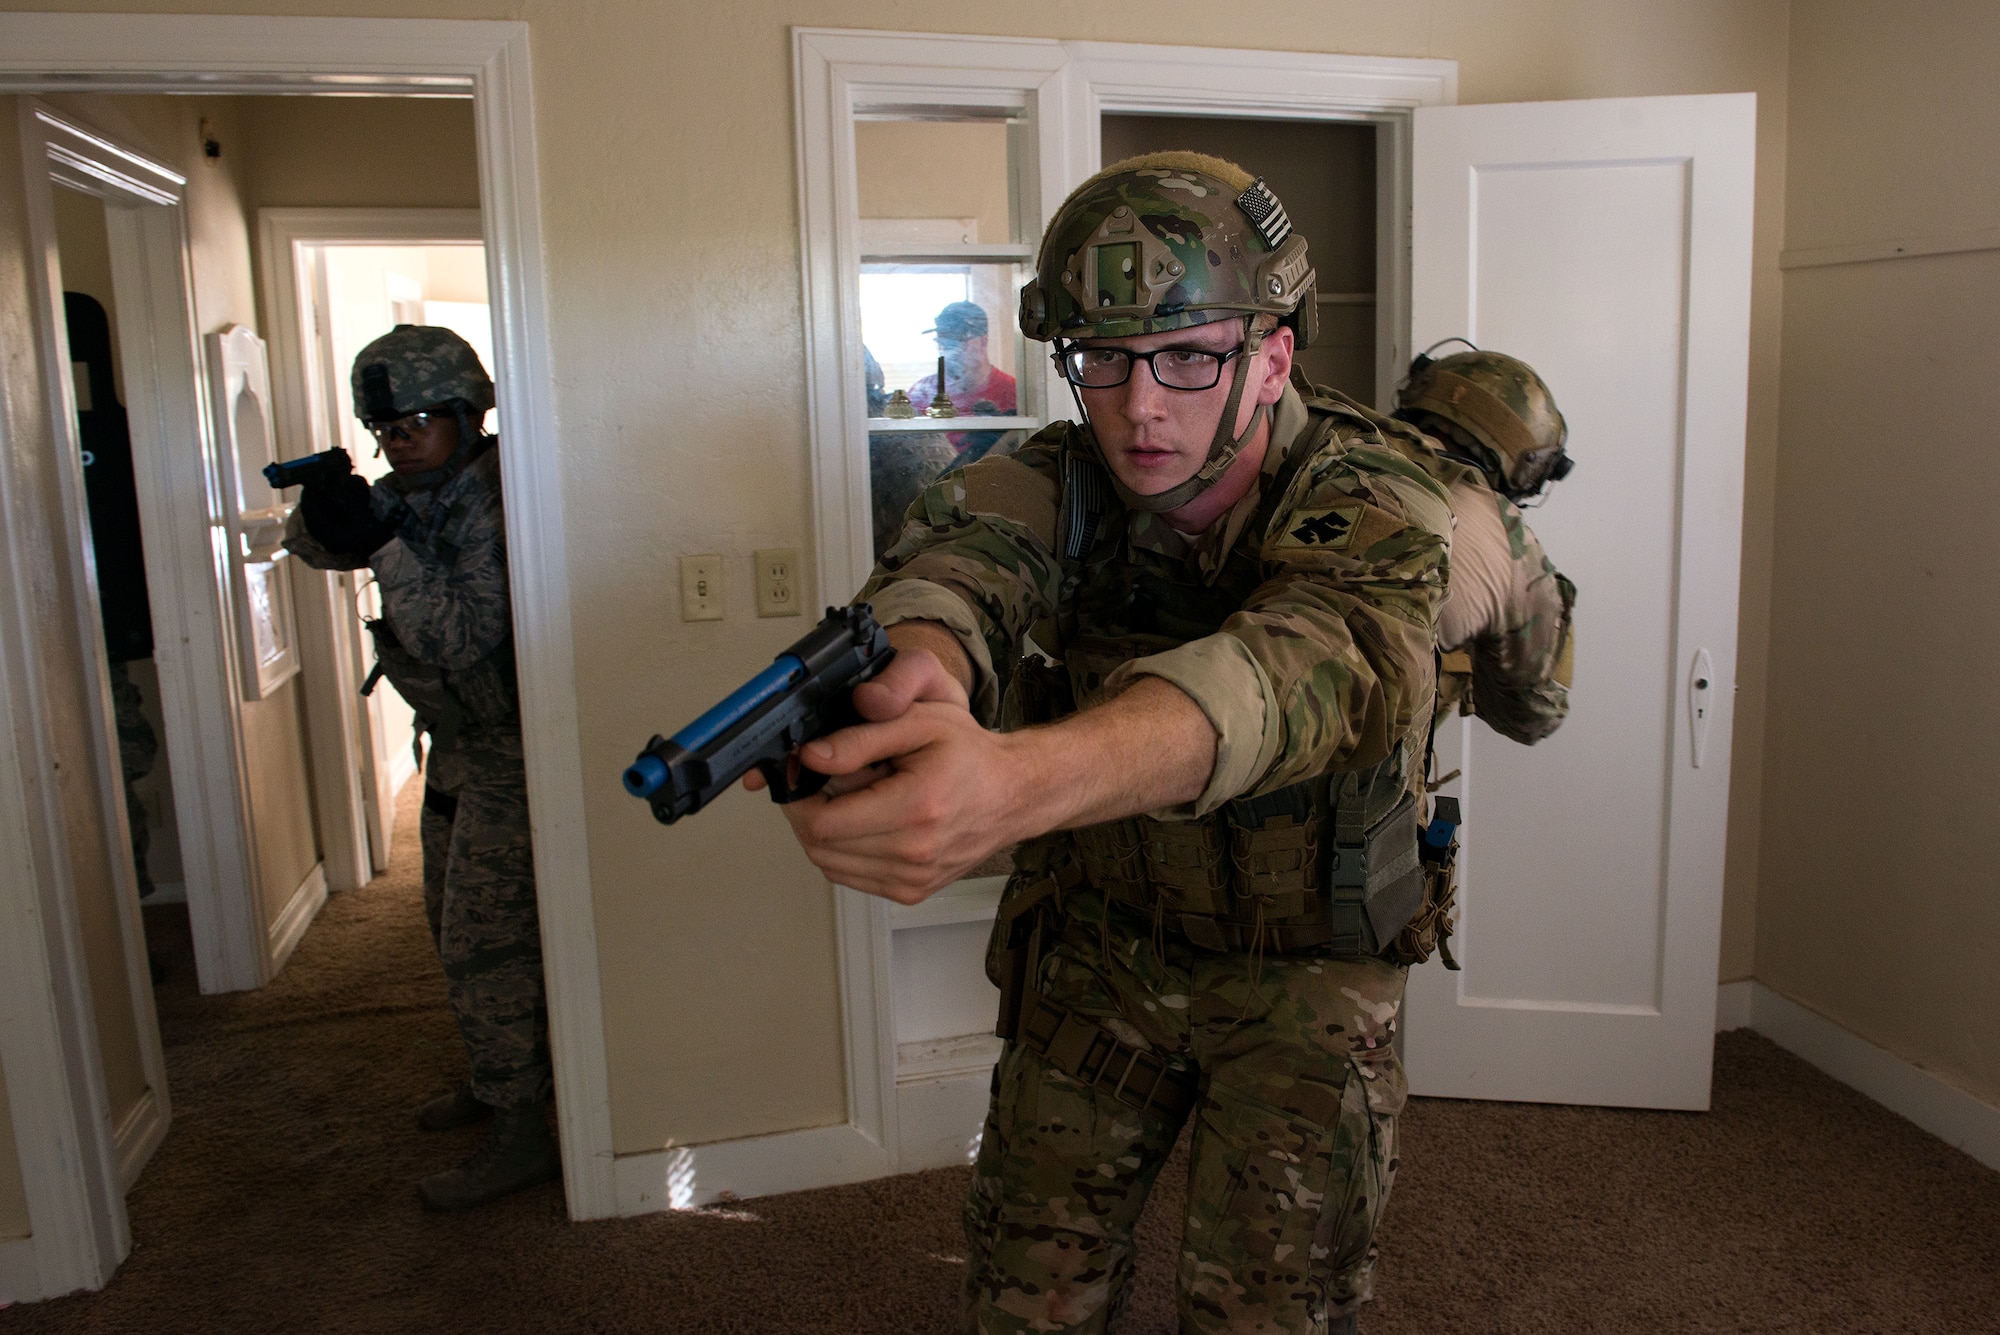 Airmen from Will Rogers Air National Guard Base in Oklahoma City move as a team to search and clear a structure at Southern Nazarene University  in Bethany, Okla., during a Special Weapons and Tactics school held by the Oklahoma County Sheriff’s Office, Oct. 26 to Nov. 6, 2015. (U.S. Air National Guard photo by Master Sgt. Andrew M. LaMoreaux)